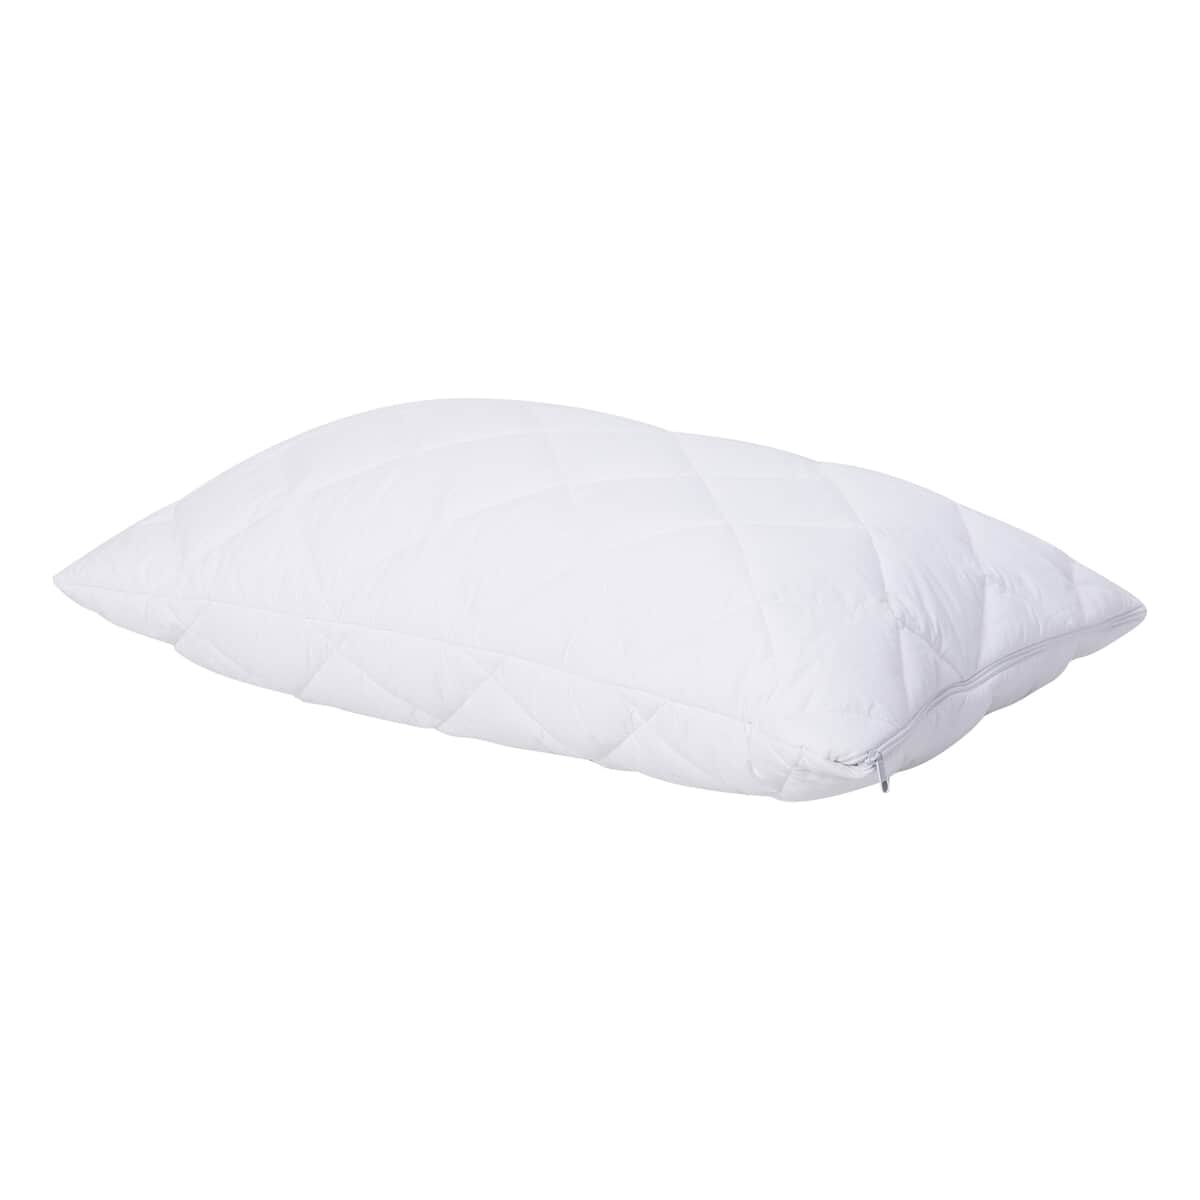 HOMESMART White Microfiber Quilted Magnet Pillow with Removable Cotton Cover - Full (Standard) image number 2